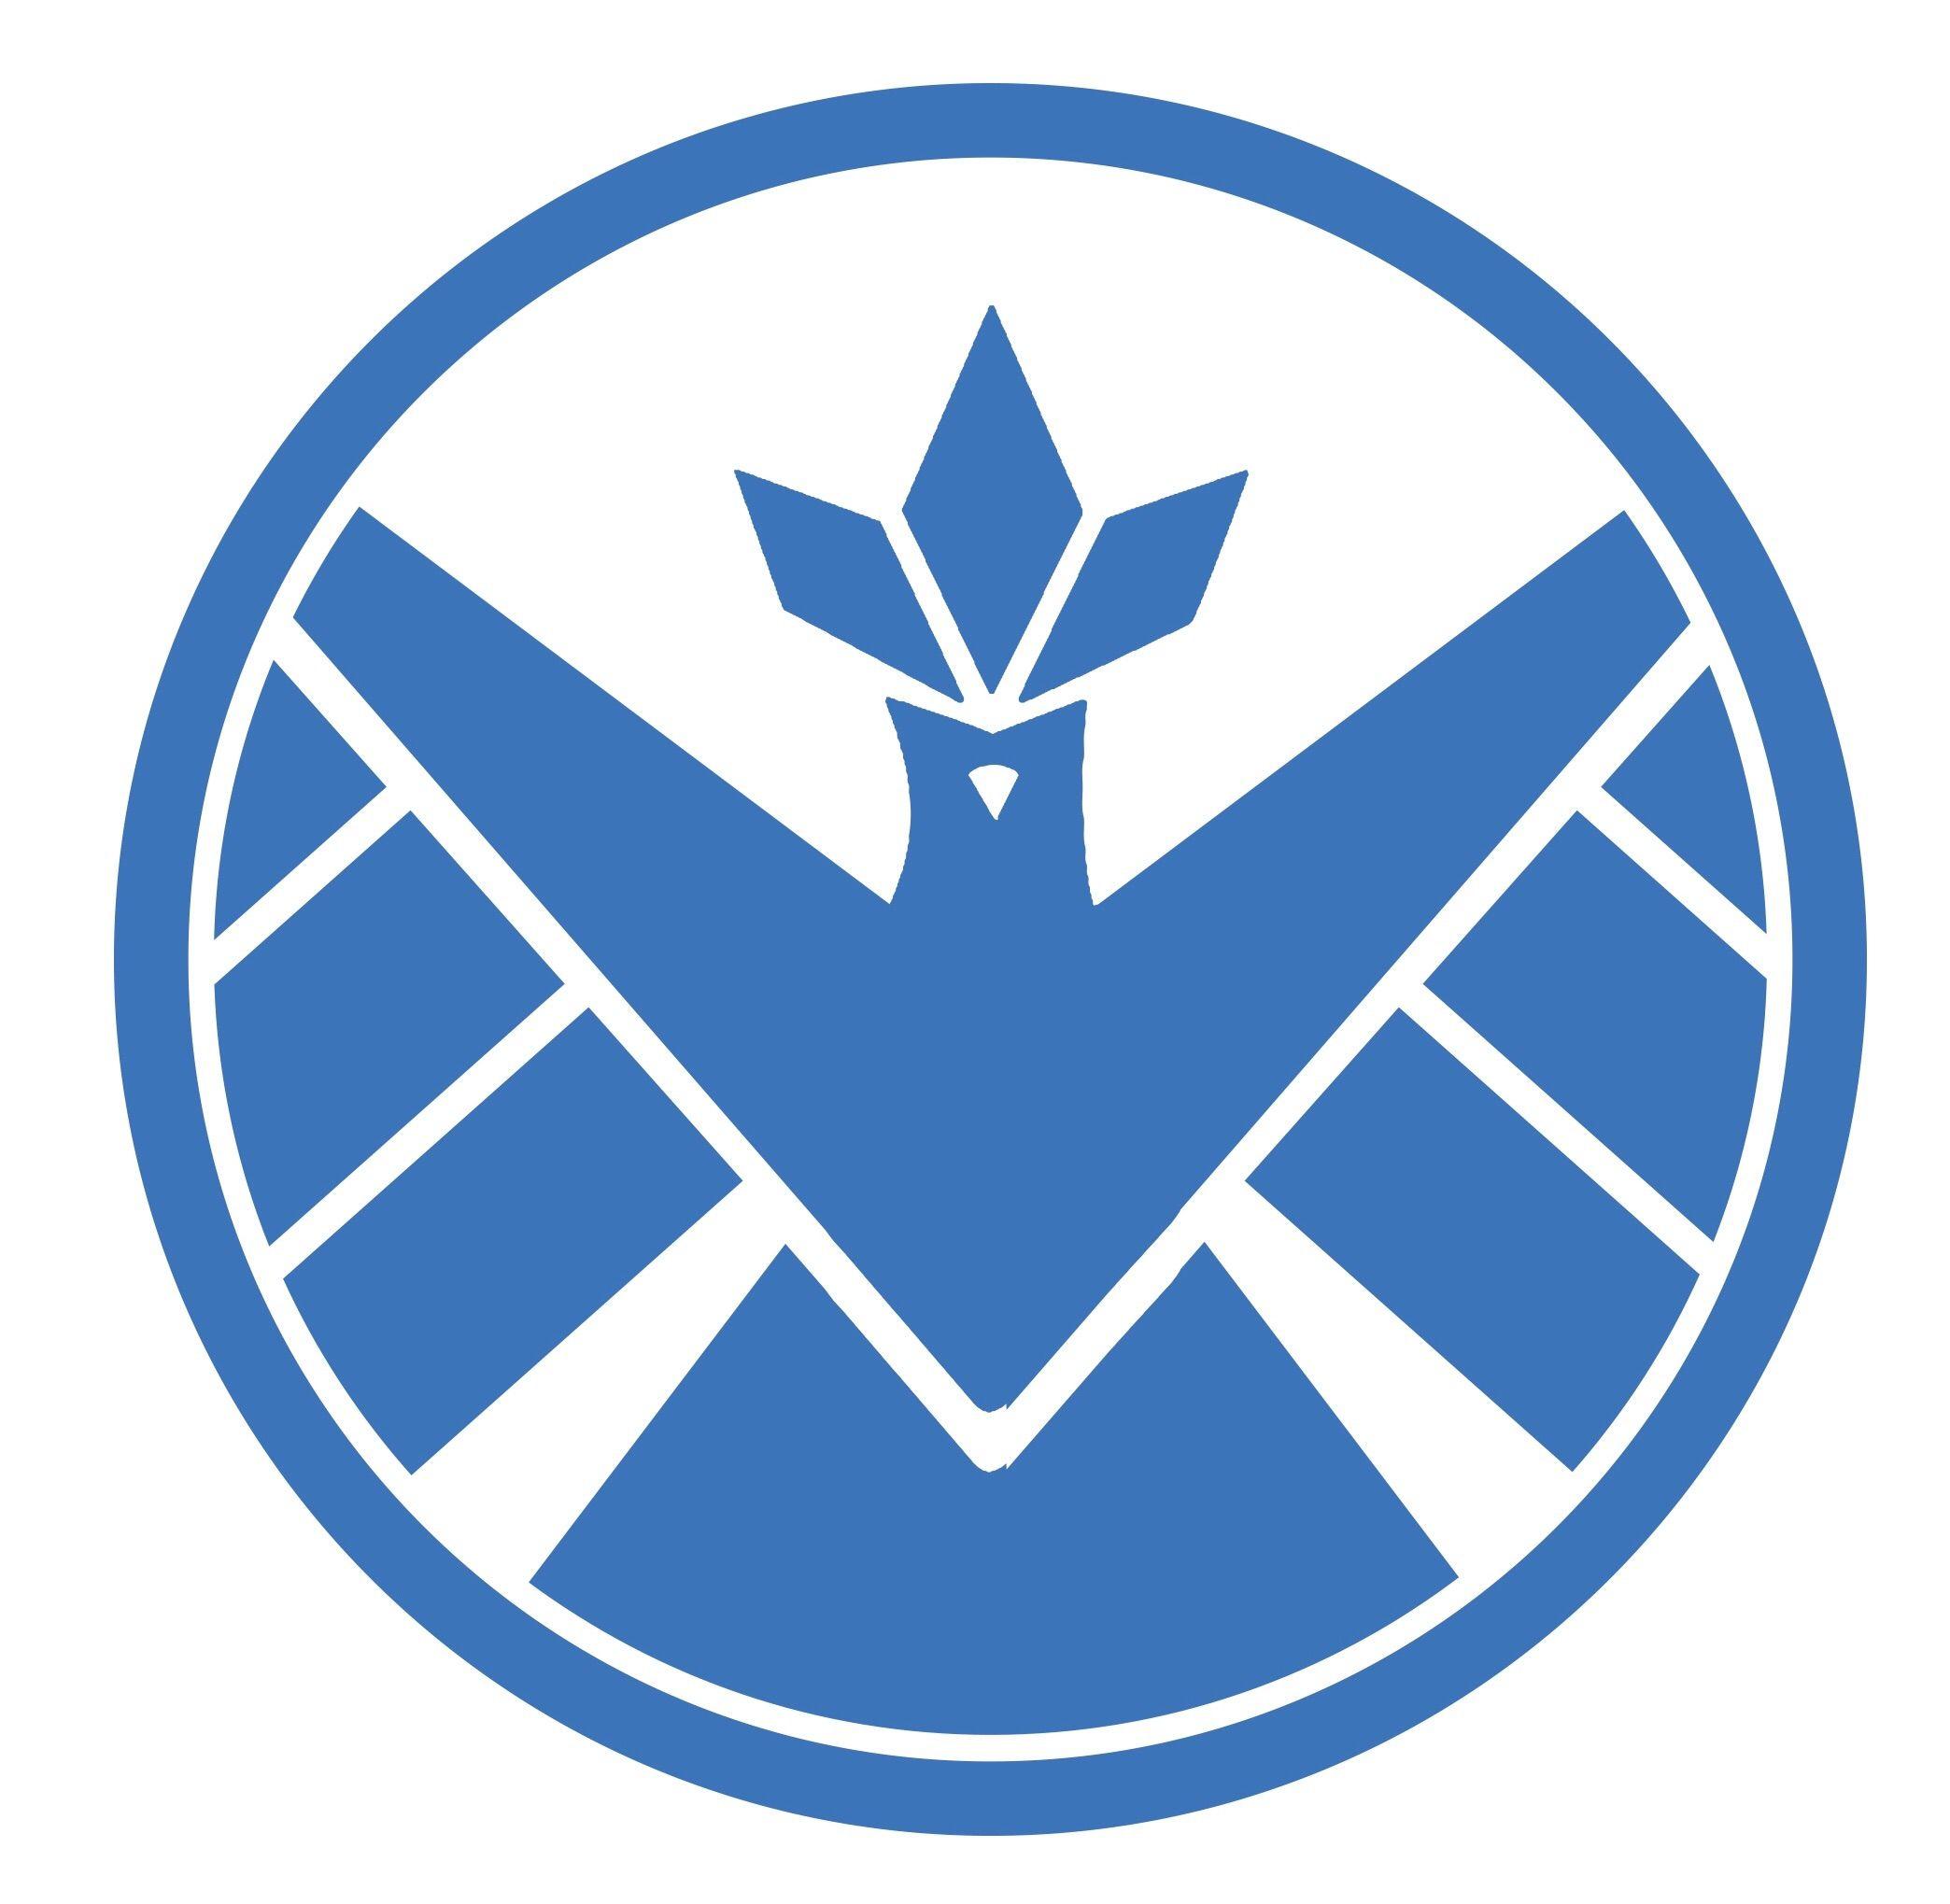 Blue Team Logo - Combined Team Mystic's logo with Marvel SHIELD's. : shield